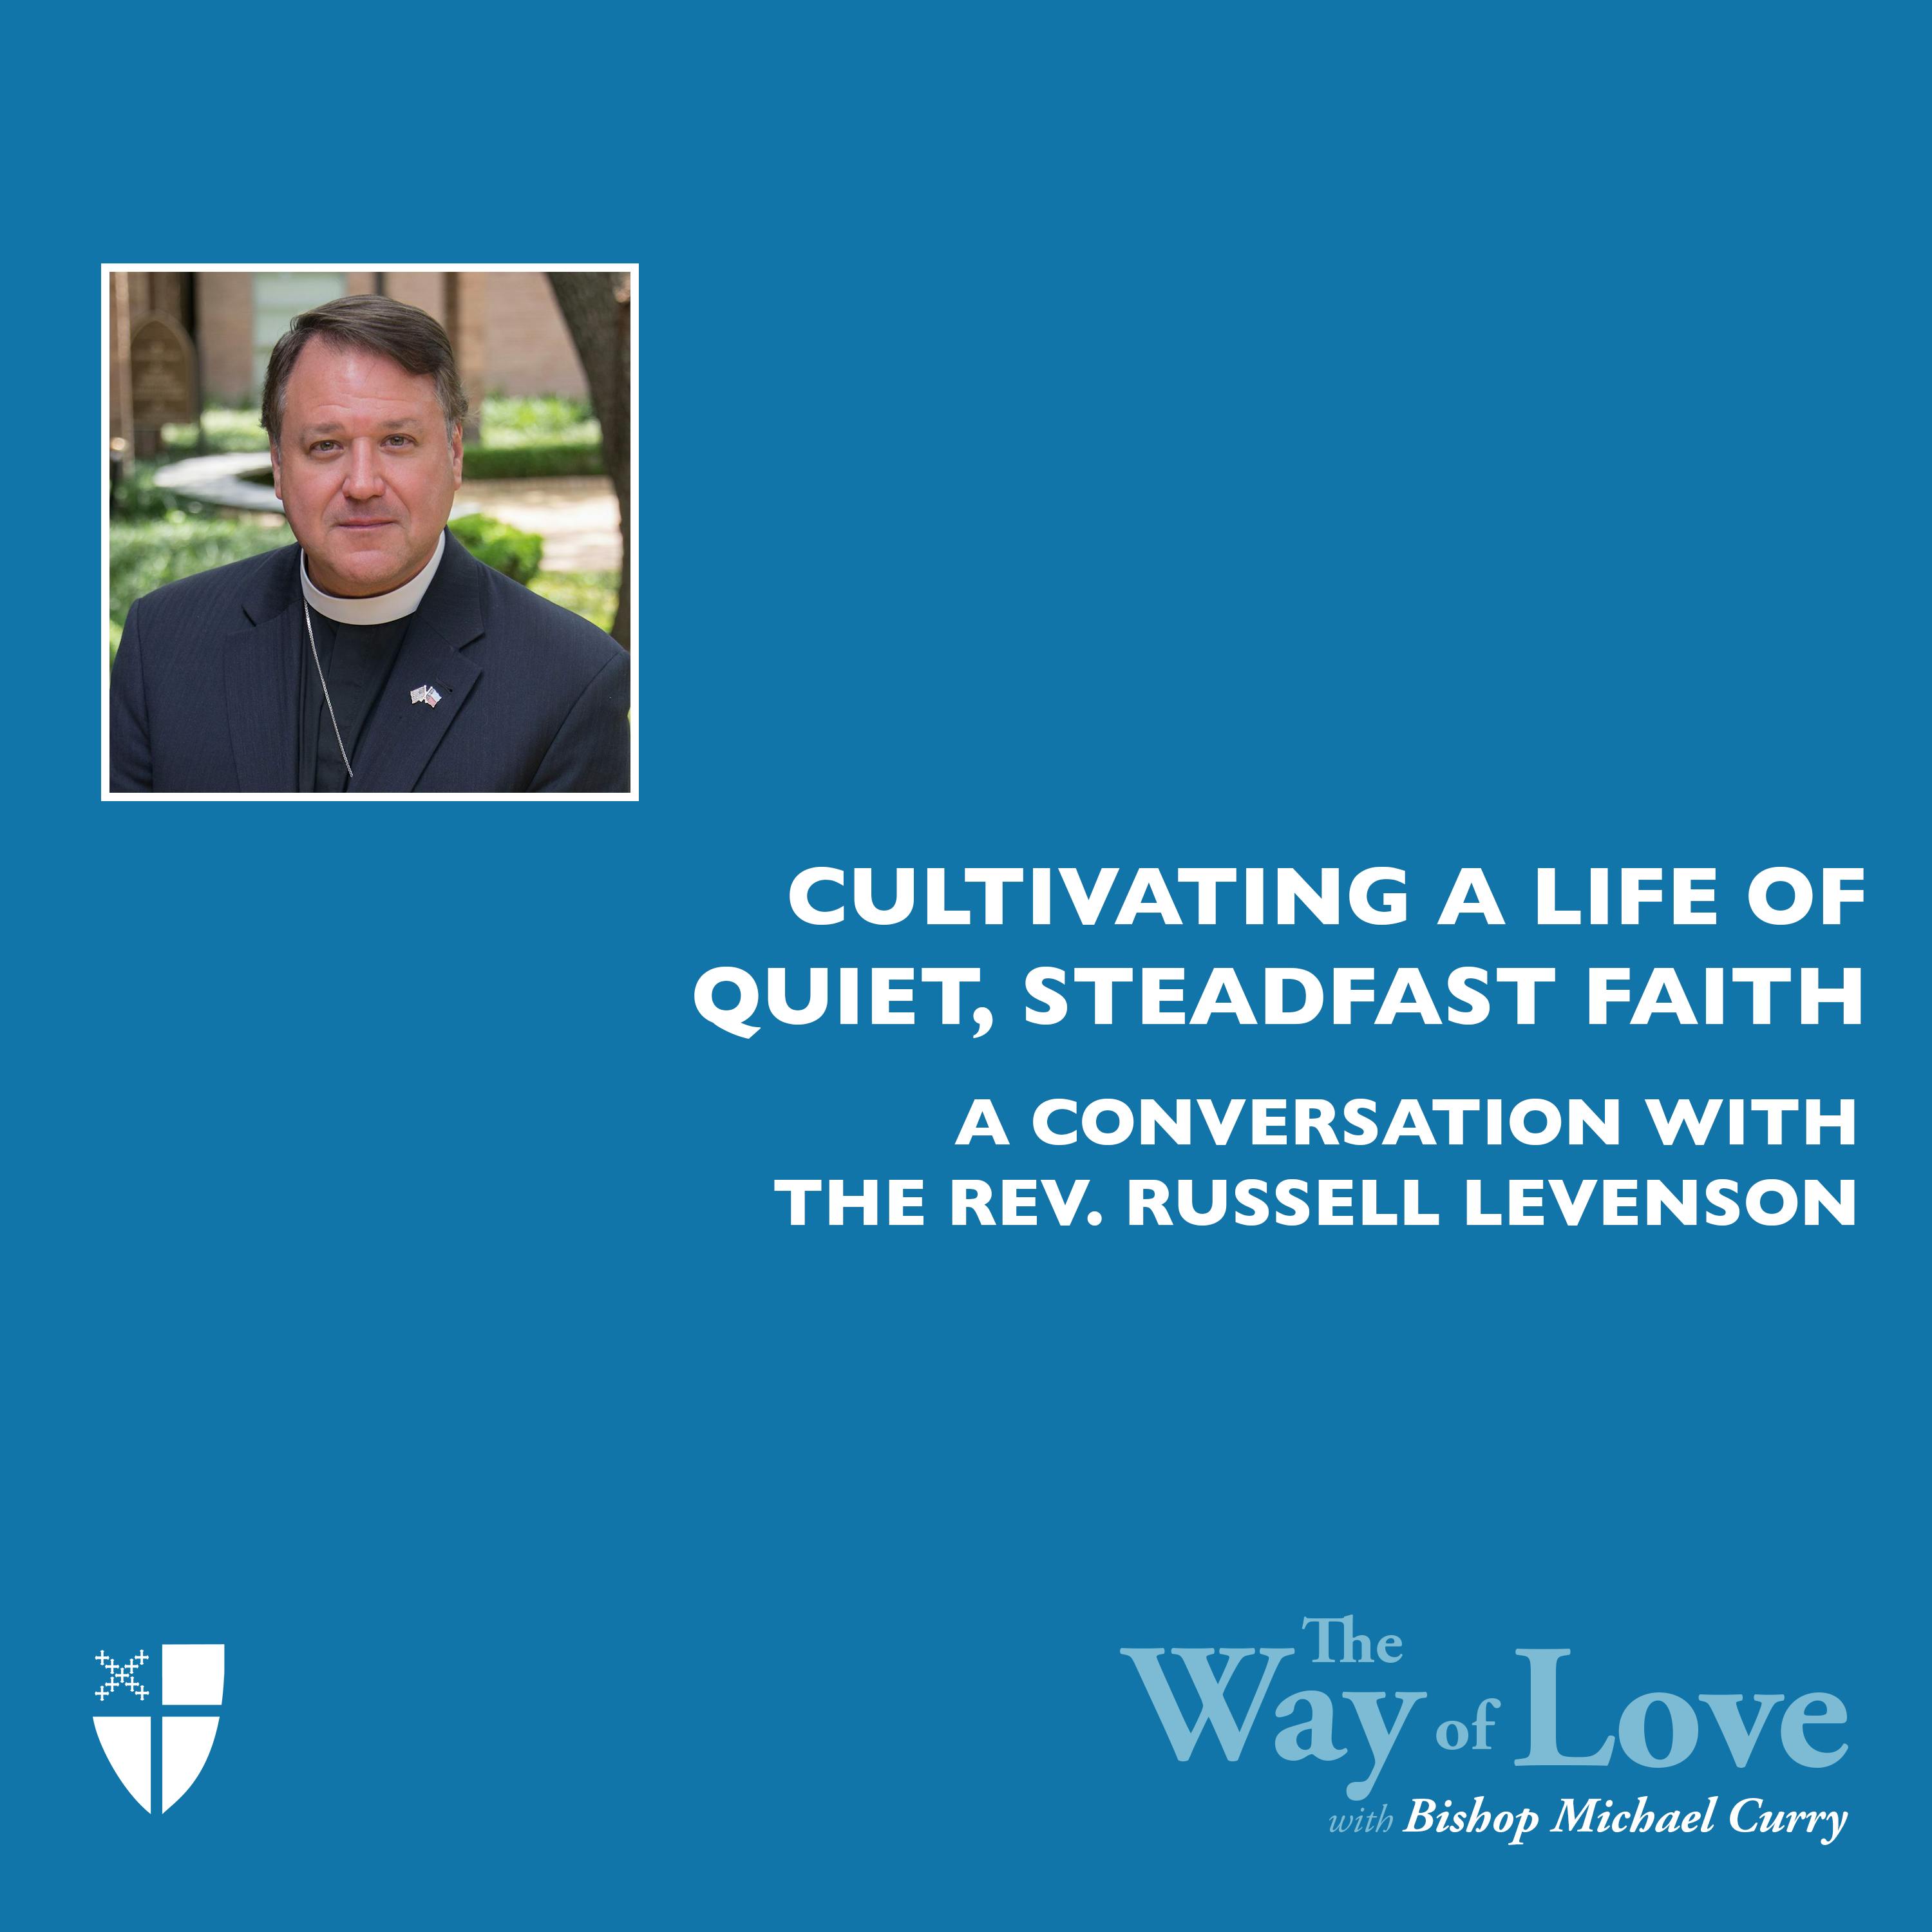 Cultivating a Life of Quiet, Steadfast Faith with The Rev. Russell Levenson